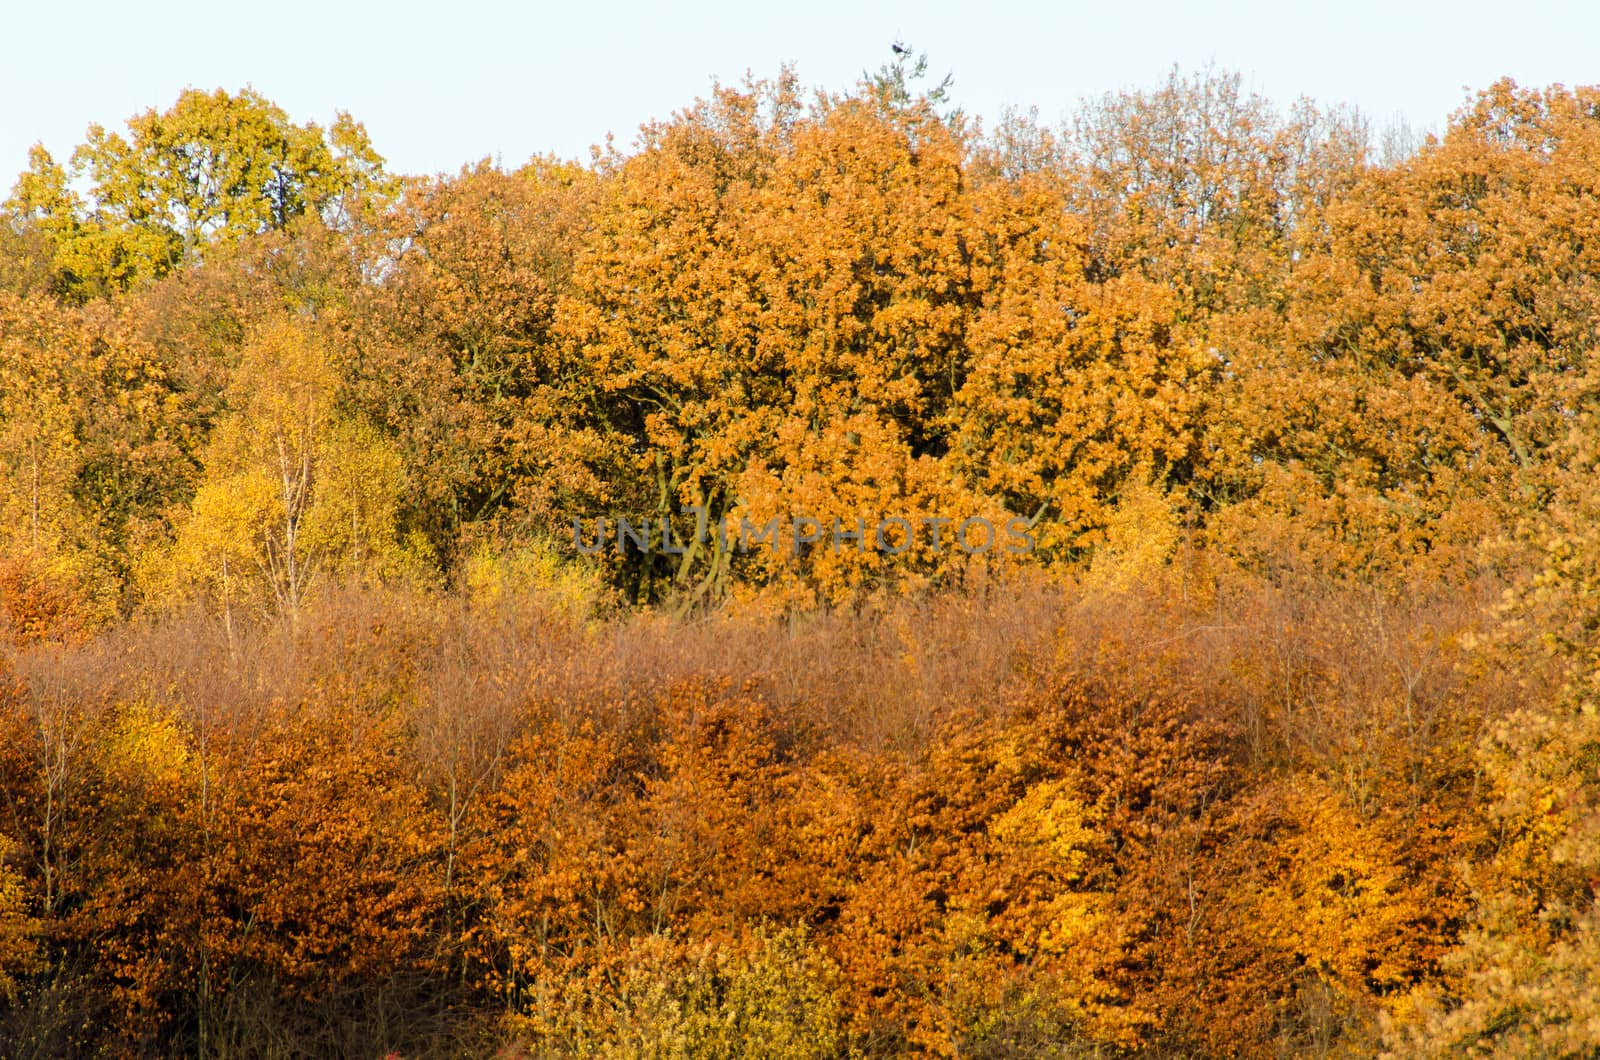 Autumn forest seen from far away with yellow beech leaves